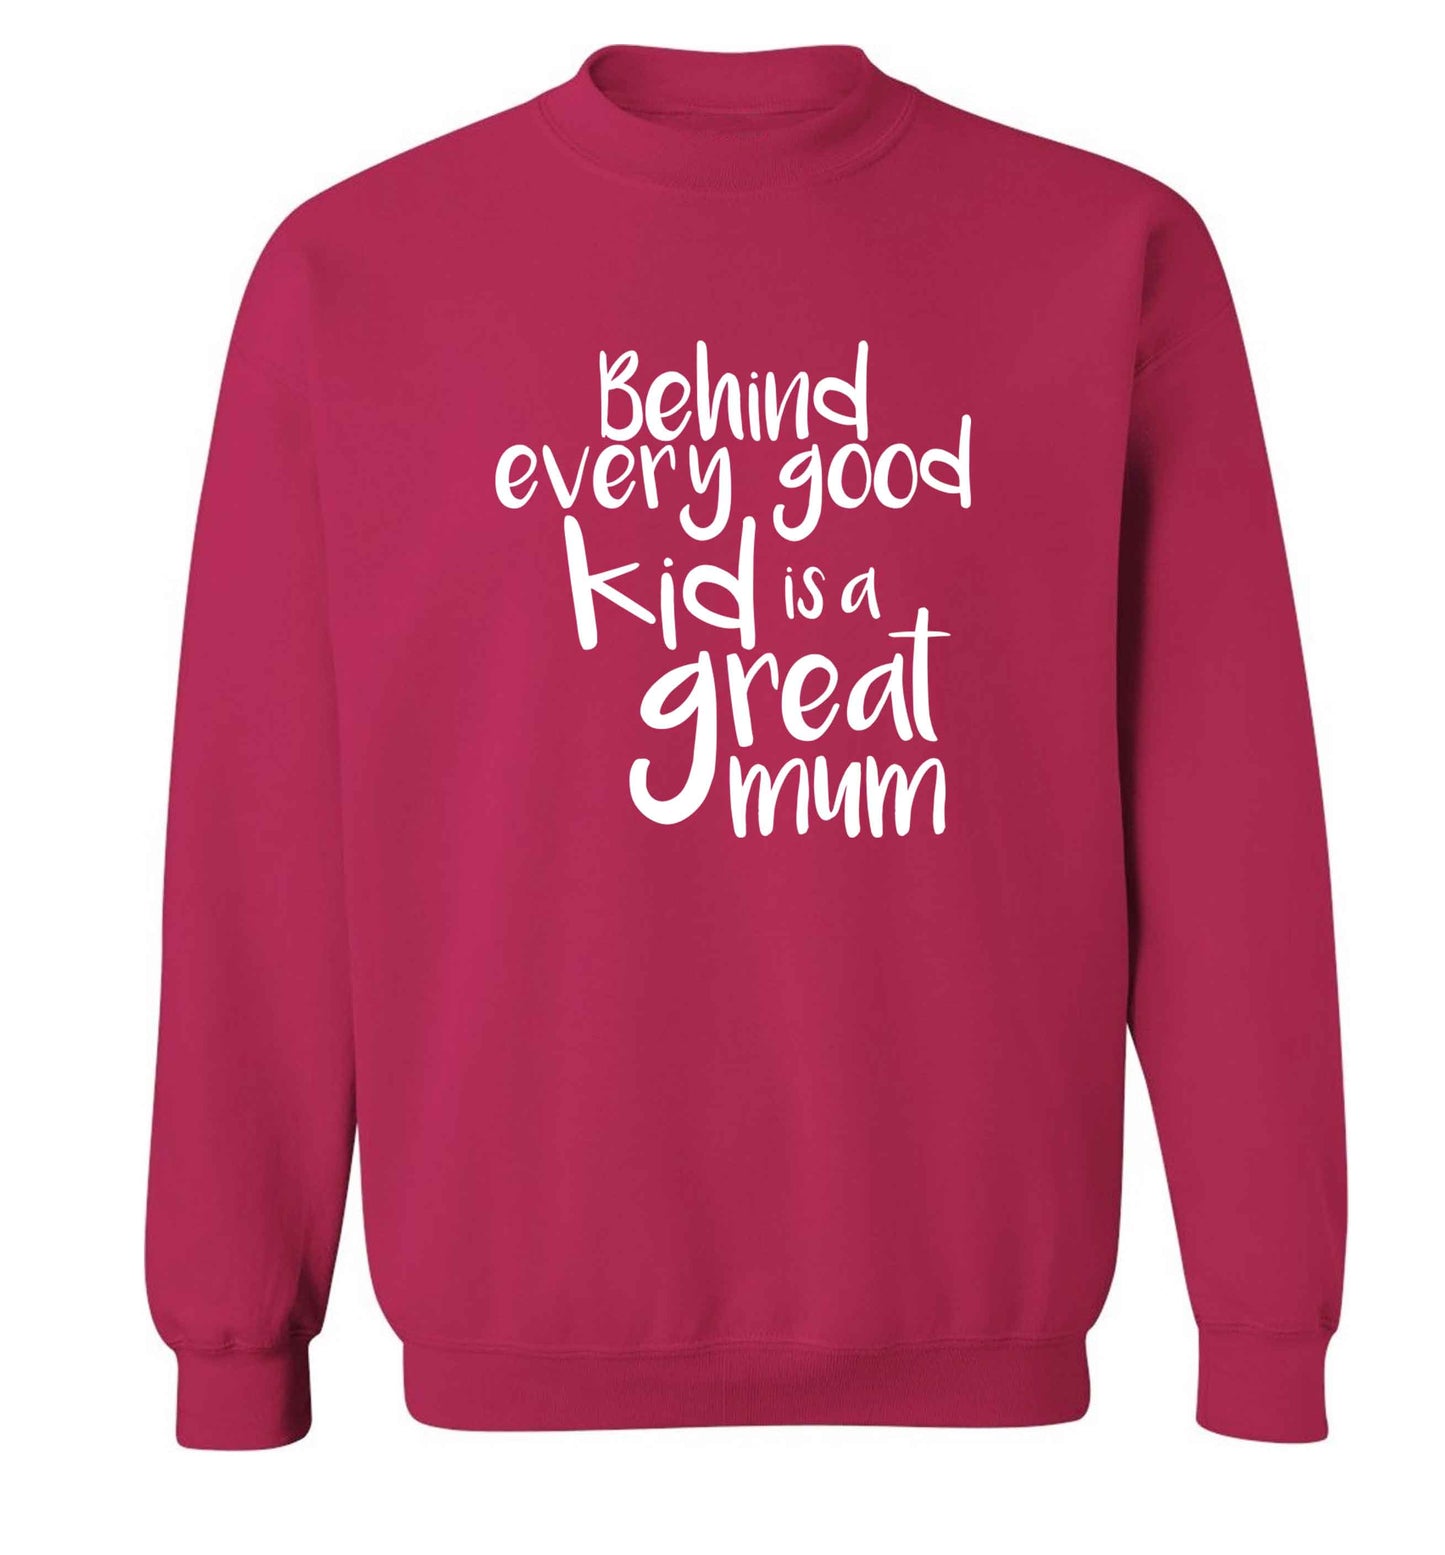 Behind every good kid is a great mum adult's unisex pink sweater 2XL